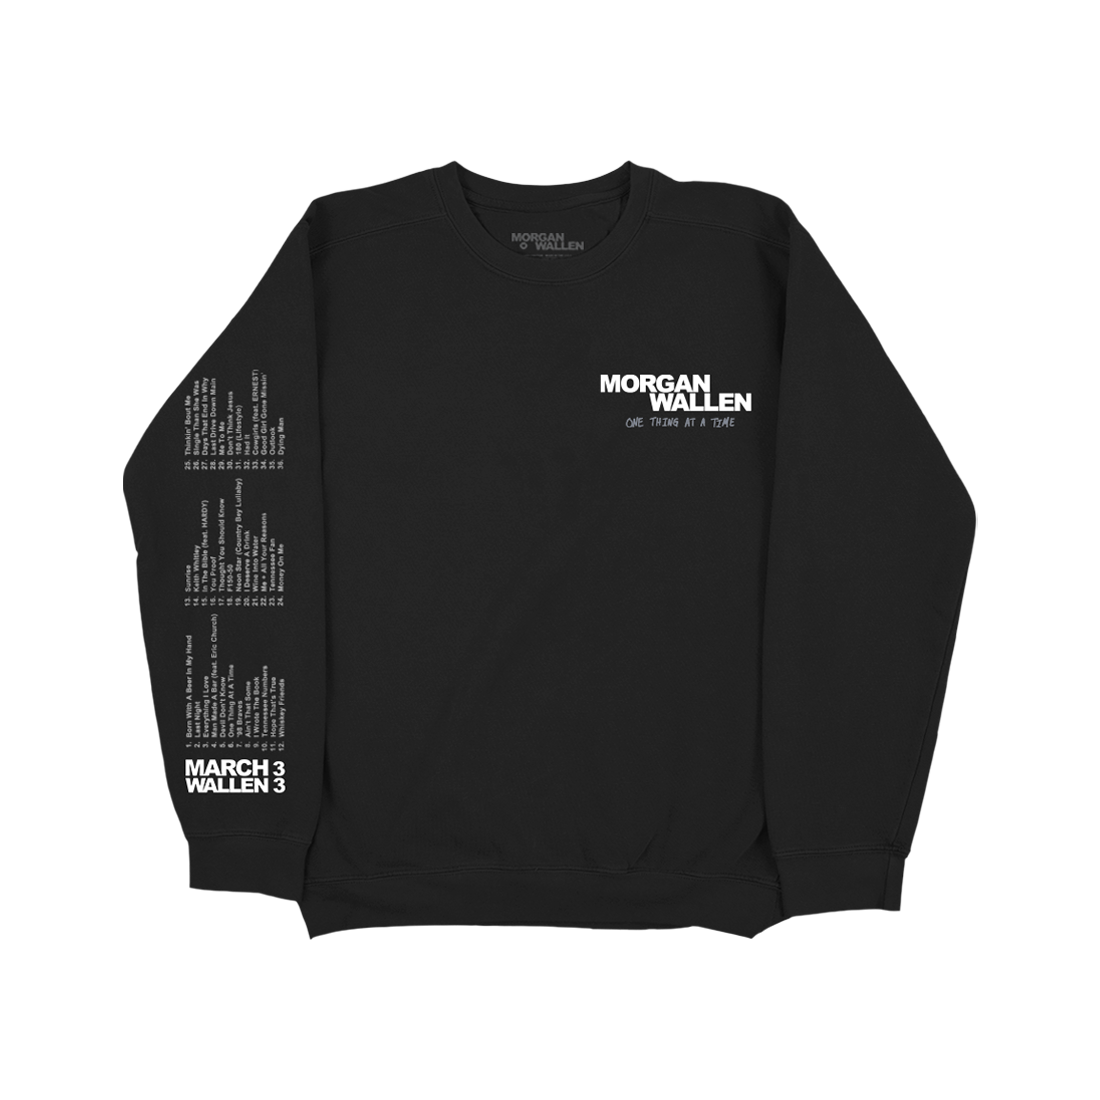 One Thing At A Time Album Cover Black Crewneck